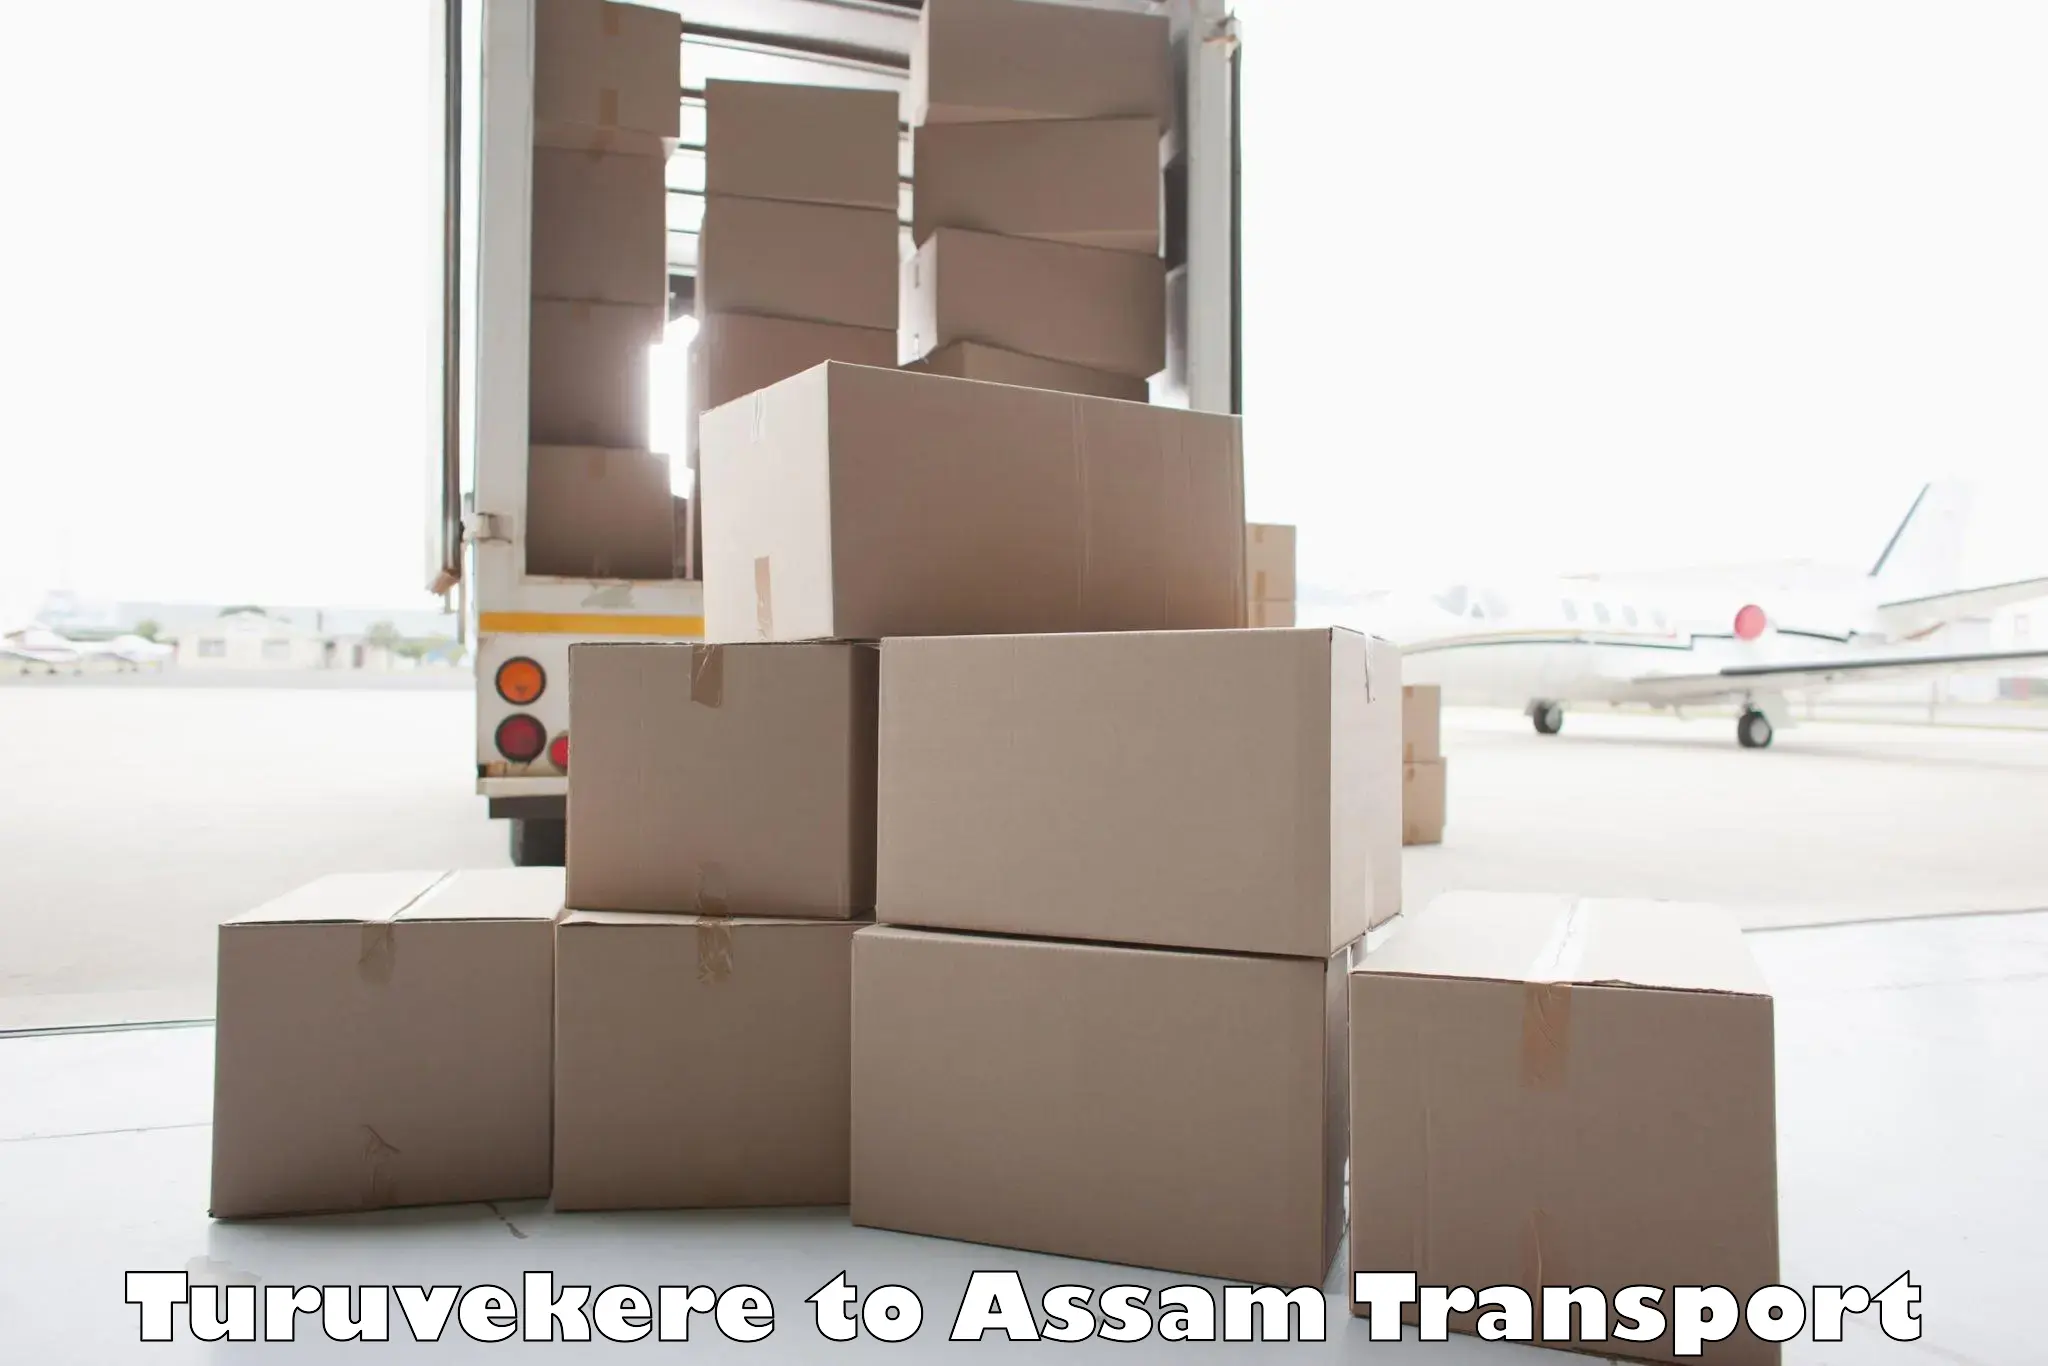 Transport bike from one state to another Turuvekere to Lala Assam